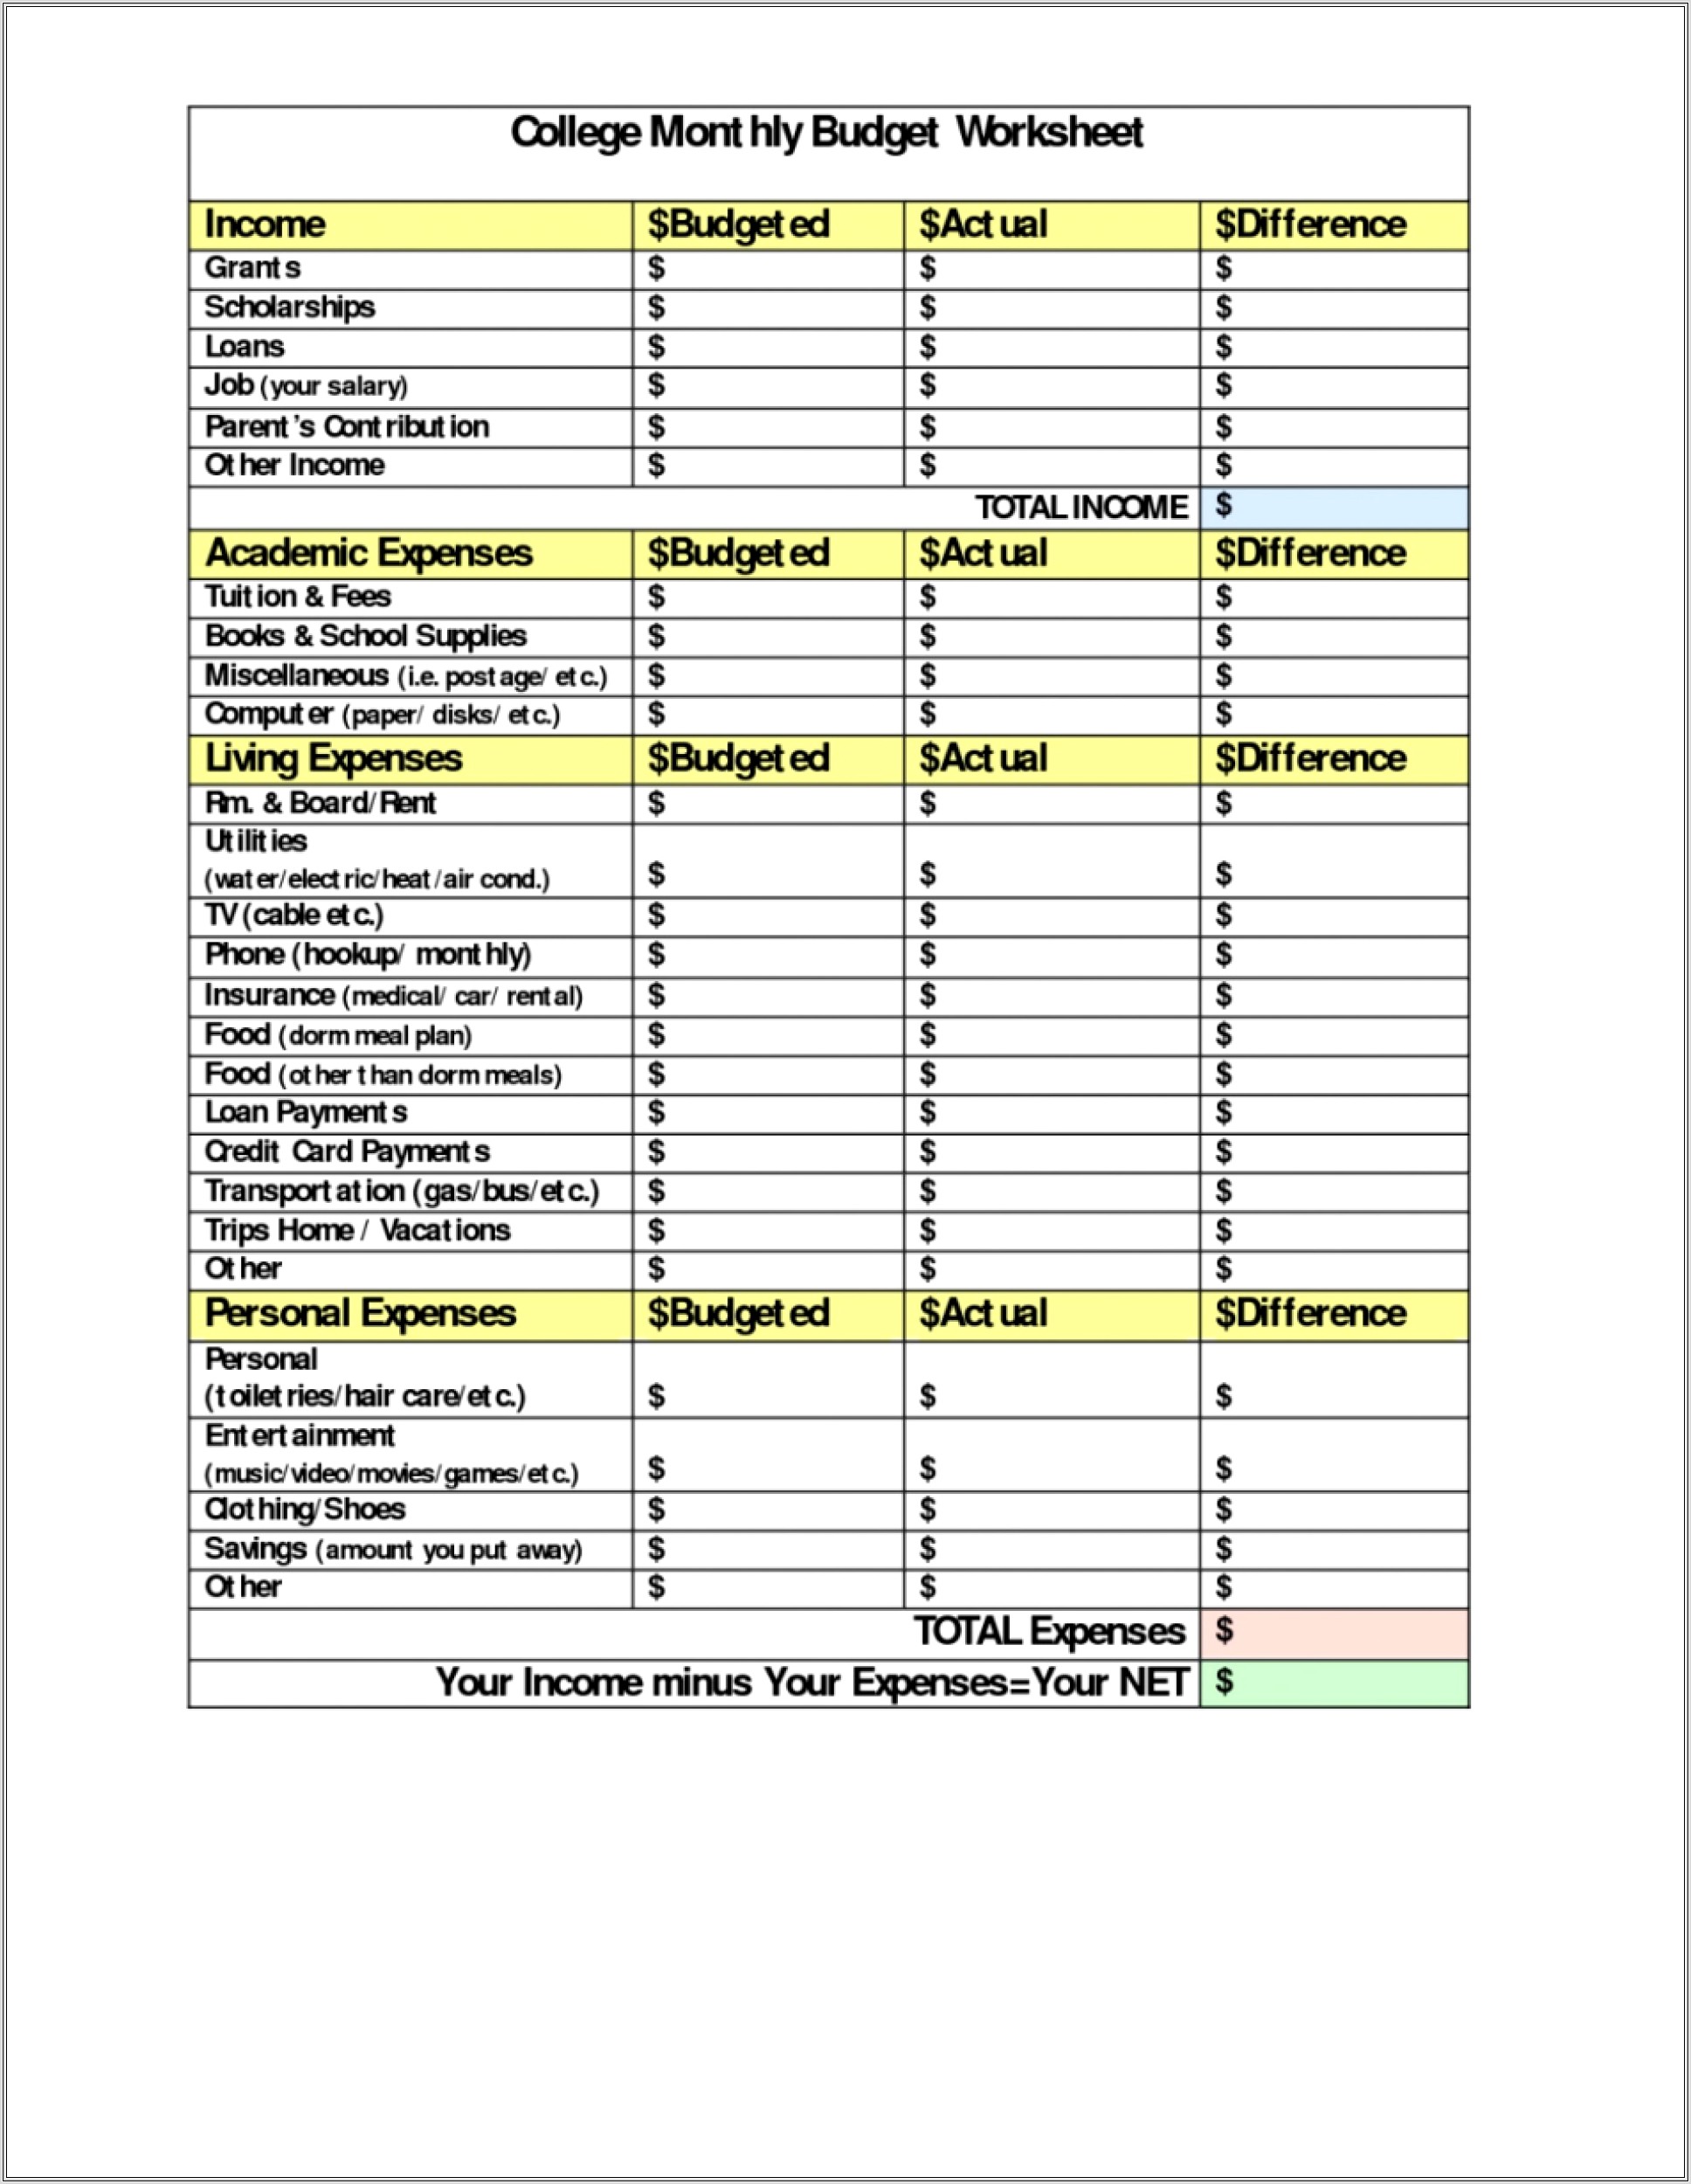 Monthly Budget Worksheet Answers